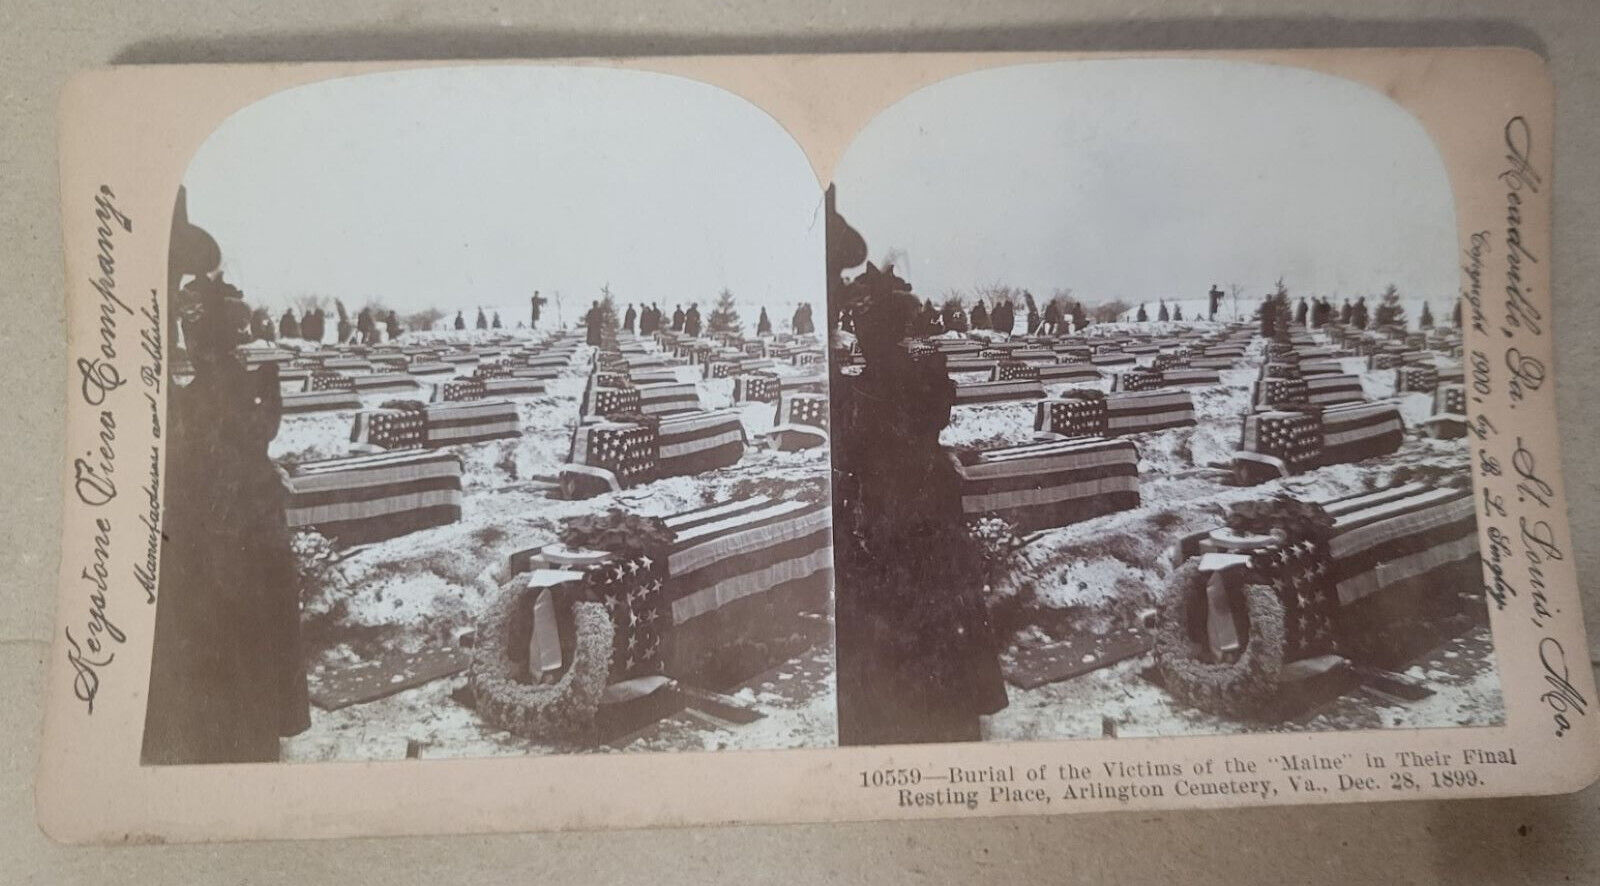 Antique KEYSTONE Stereoview Card - Burial of the Victims of the \